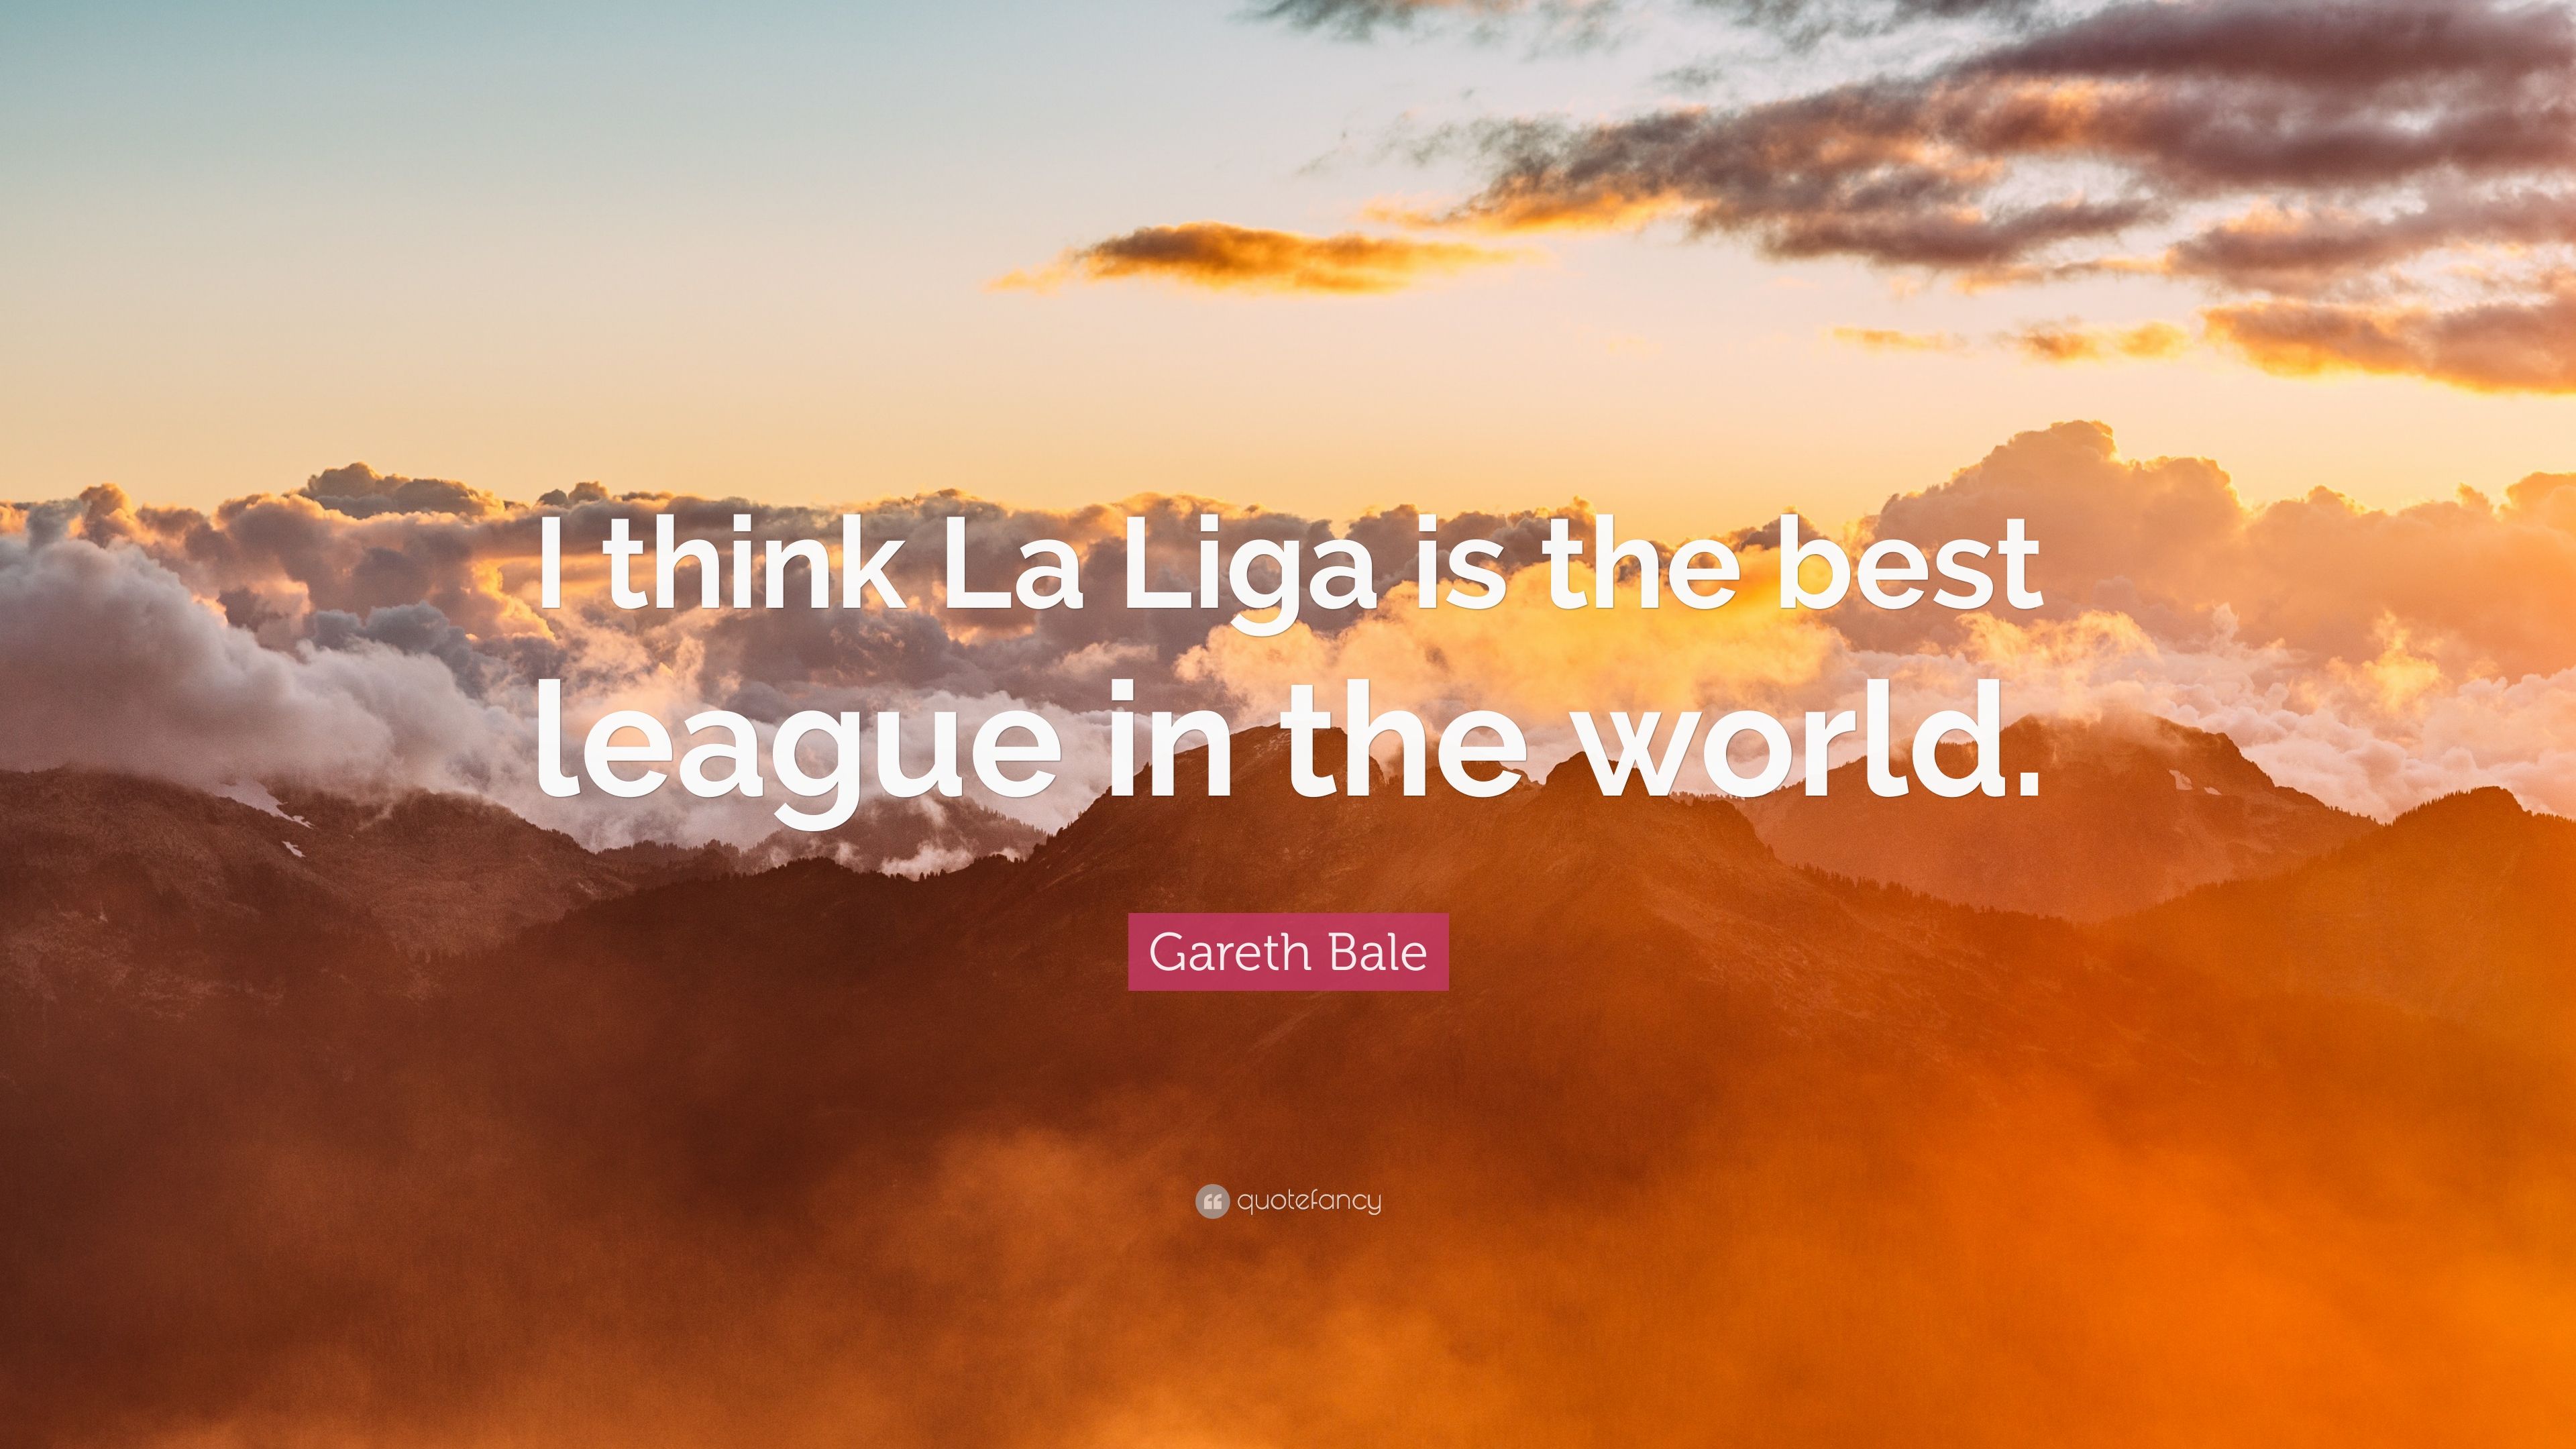 Gareth Bale Quote - You Have More Than You Think - HD Wallpaper 